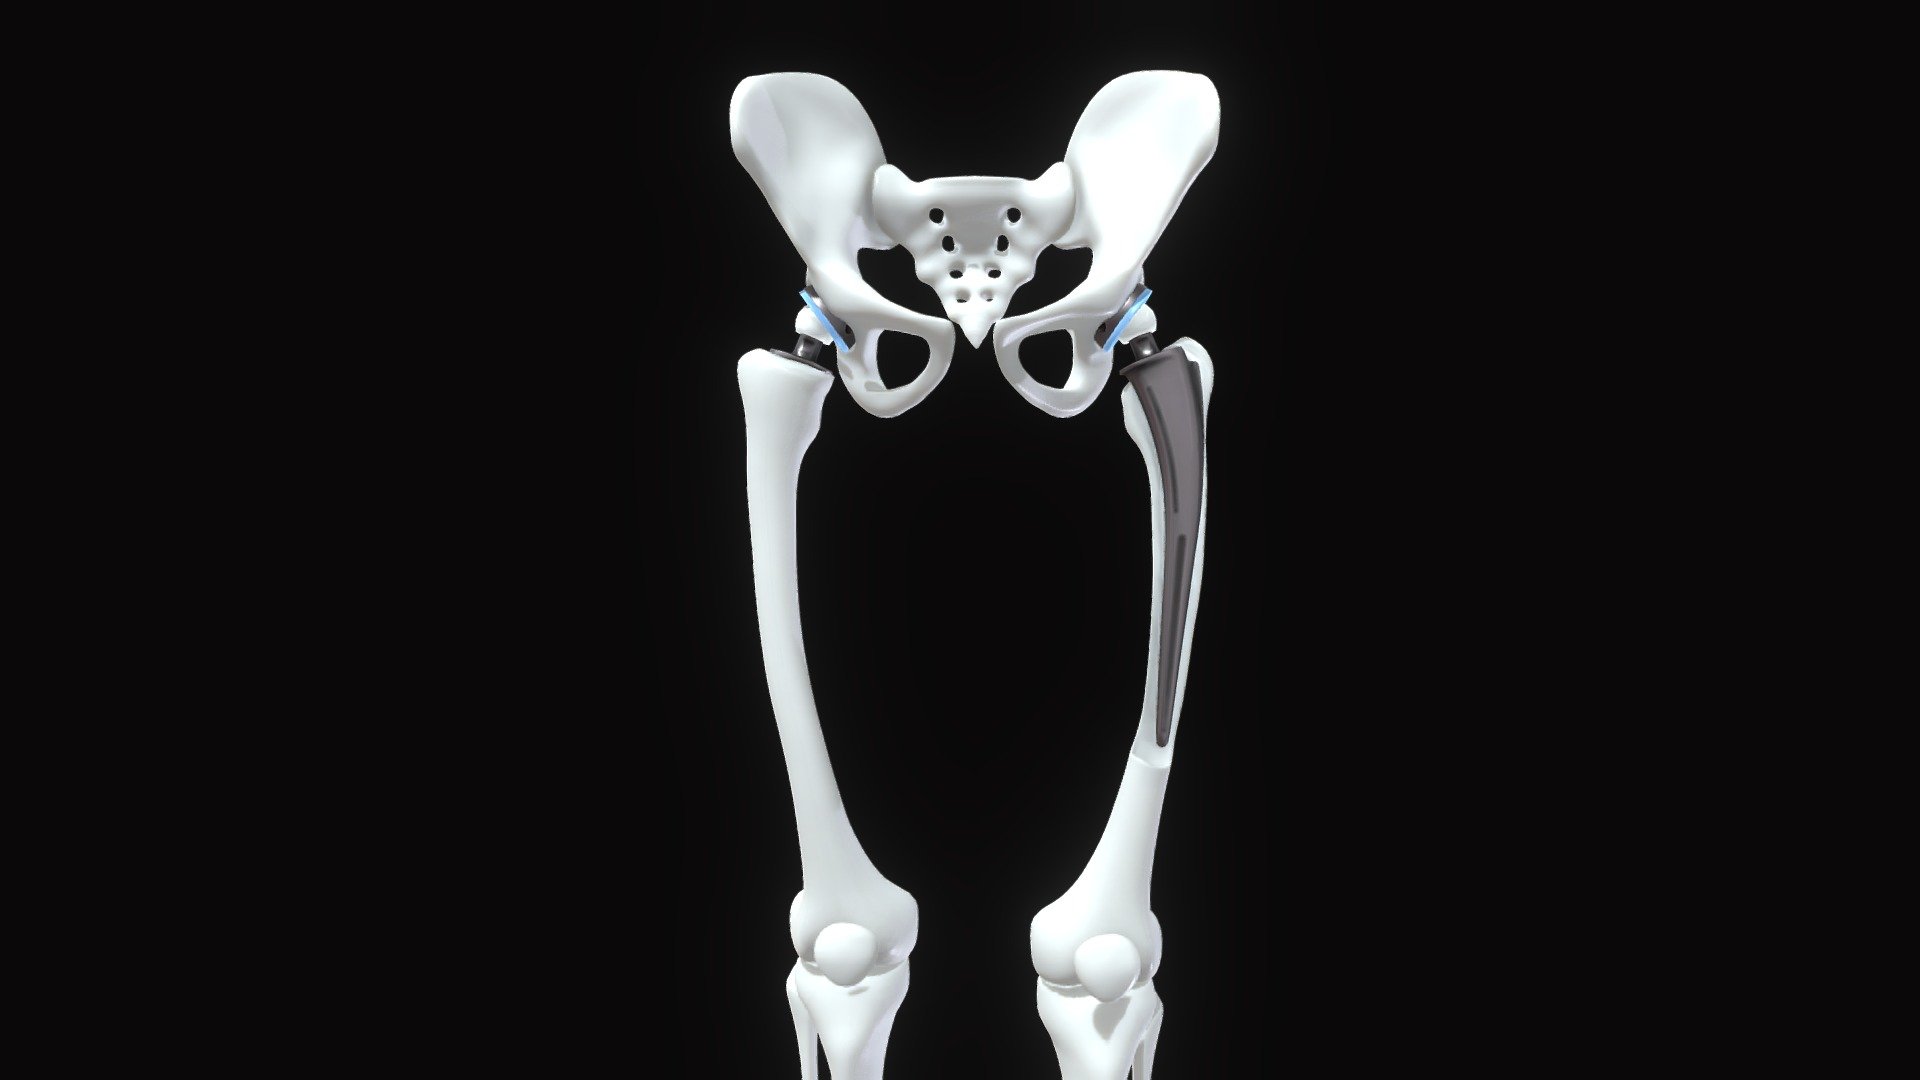 Originally modeled in Cinema 4D R 21


Maps for Hip replacement implant installed in the pelvis bone
2 object :
Implant 
- BaseColor
- Metallic
- Roughness
- Normal
- AO
Legs
- BaseColor
- Metallic
- Roughness
- Normal


SCALE:
- Model at world center and real scale:
       Metric in centimeter
       1 unit = 1 centimeter


Texture resolution 4096x4096
Texture format PNG


Poly Count :
Polygon Count - 91645
Vertex Count - 89825 - Hip Replacement Implant Bone Legs - Buy Royalty Free 3D model by zames1992 3d model